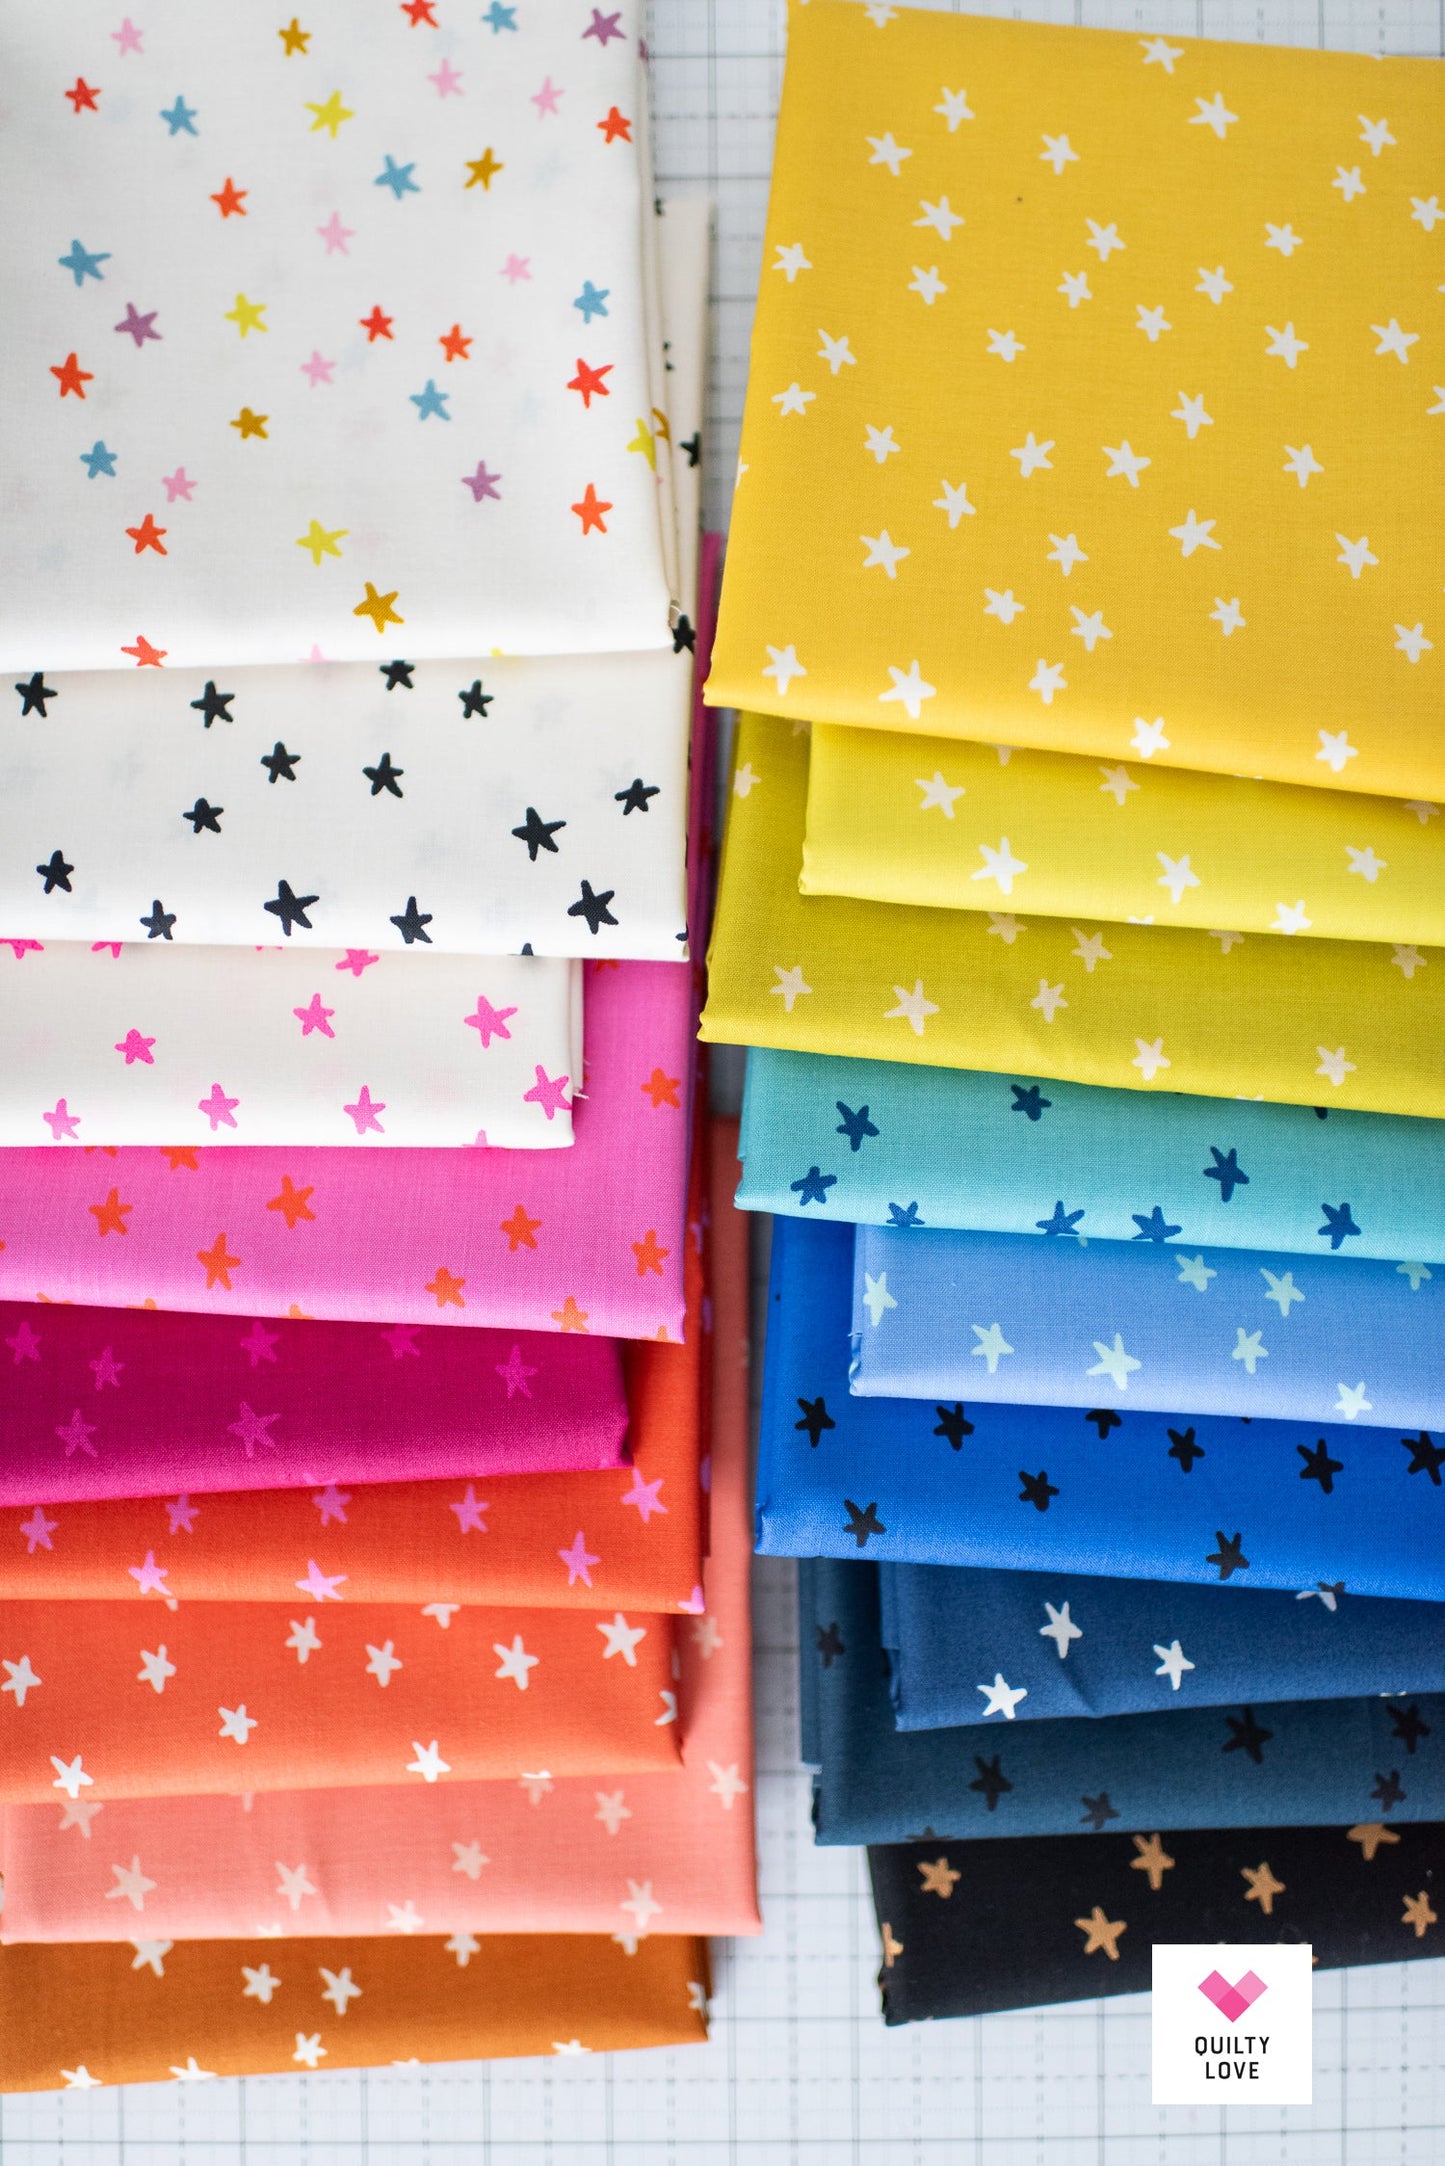 New Starry Fat Quarter Bundle by Ruby Star Society